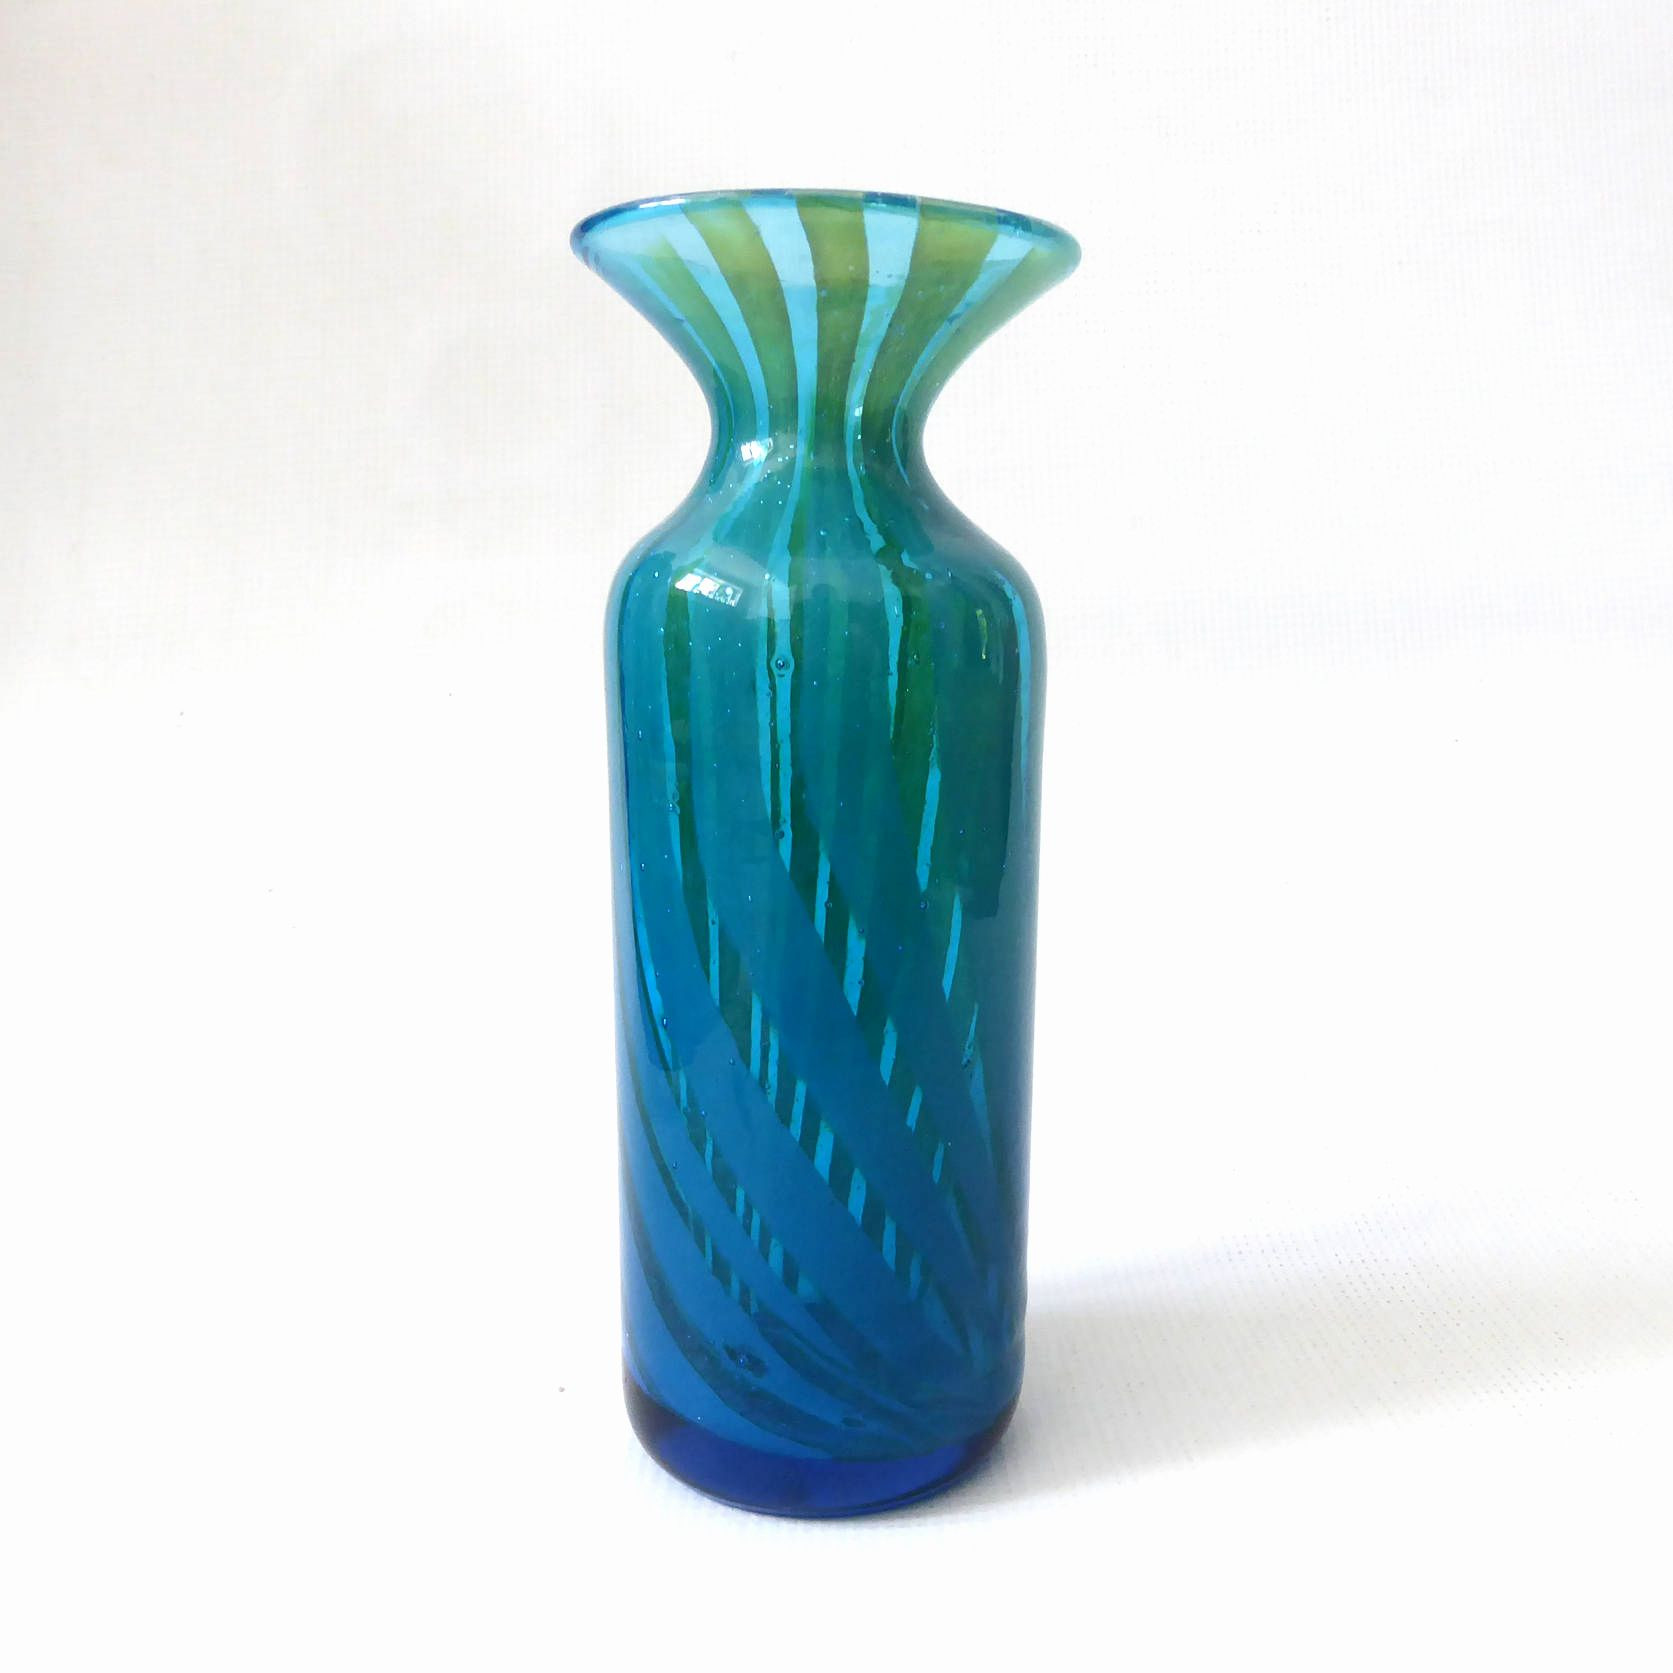 16 Unique Stained Glass Vase 2024 free download stained glass vase of 35 antique green glass vases the weekly world regarding antique glass vases identify vase and cellar image avorcor